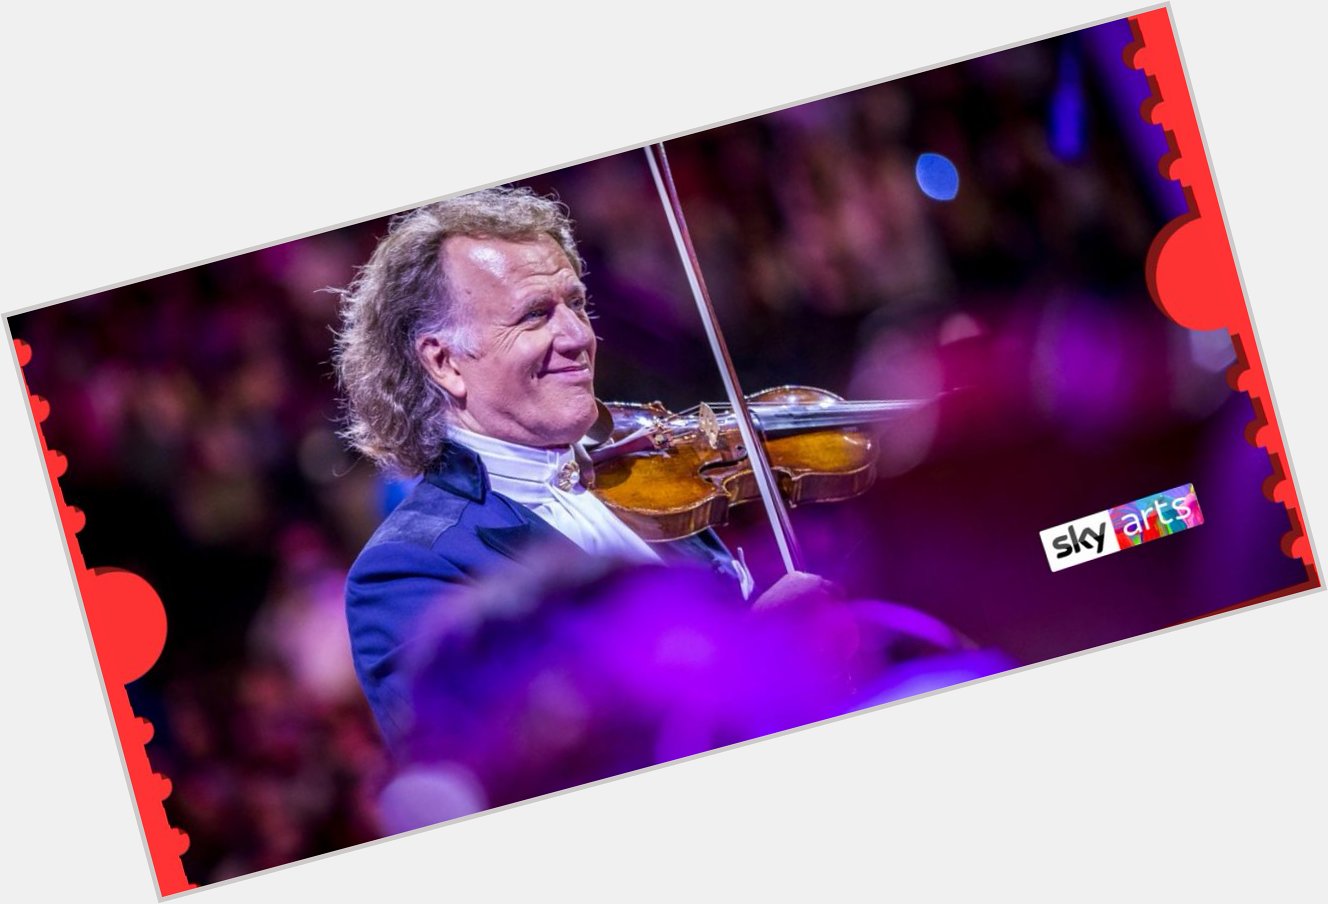 Now available on NowTV - Andre Rieu: Happy Birthday 3.3 for 79 days  